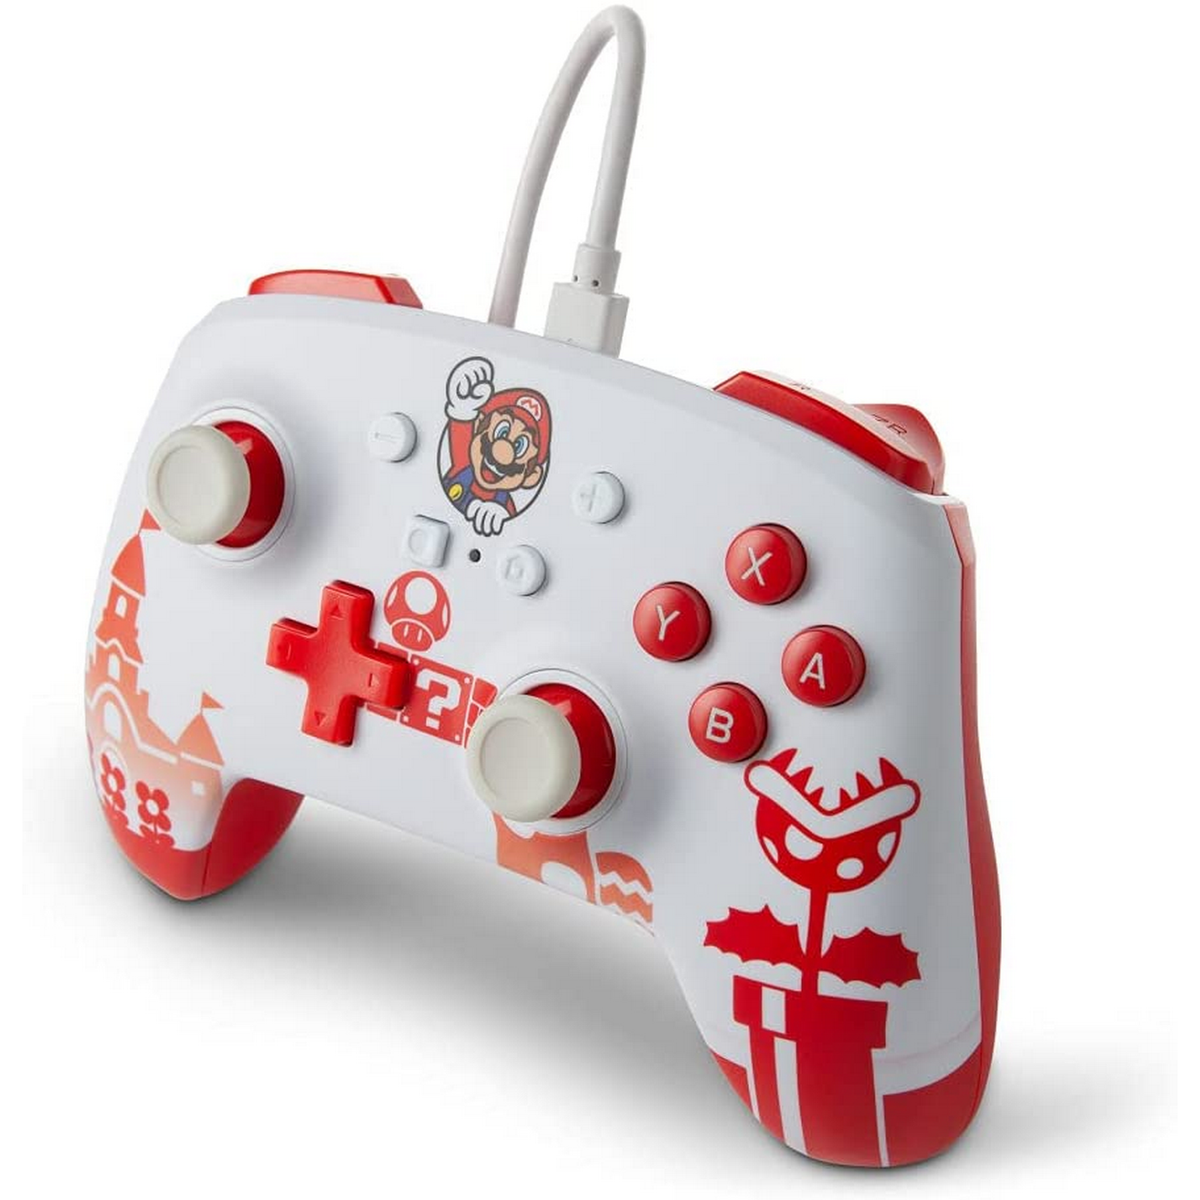 POWER A PA1519186-01NSW WIRED CONTR Rot/Weiß Controller RED/WHITE MARIO